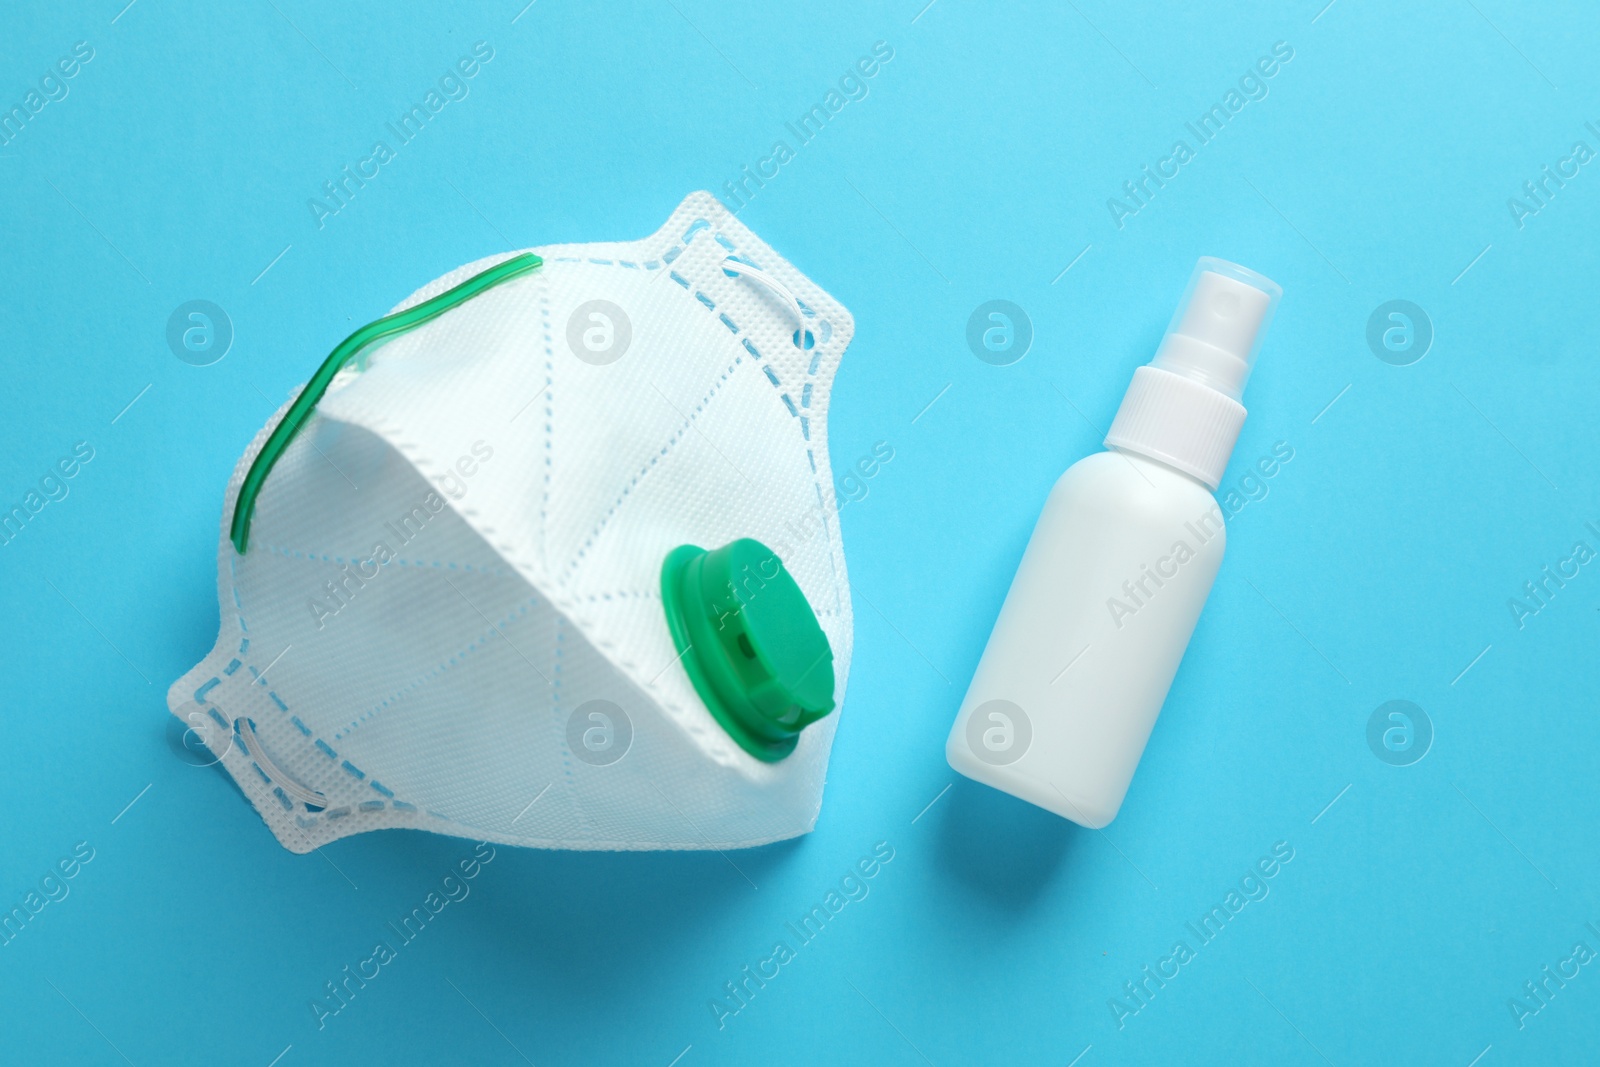 Photo of Respiratory mask and hand sanitizer on light blue background, flat lay. Safety equipment